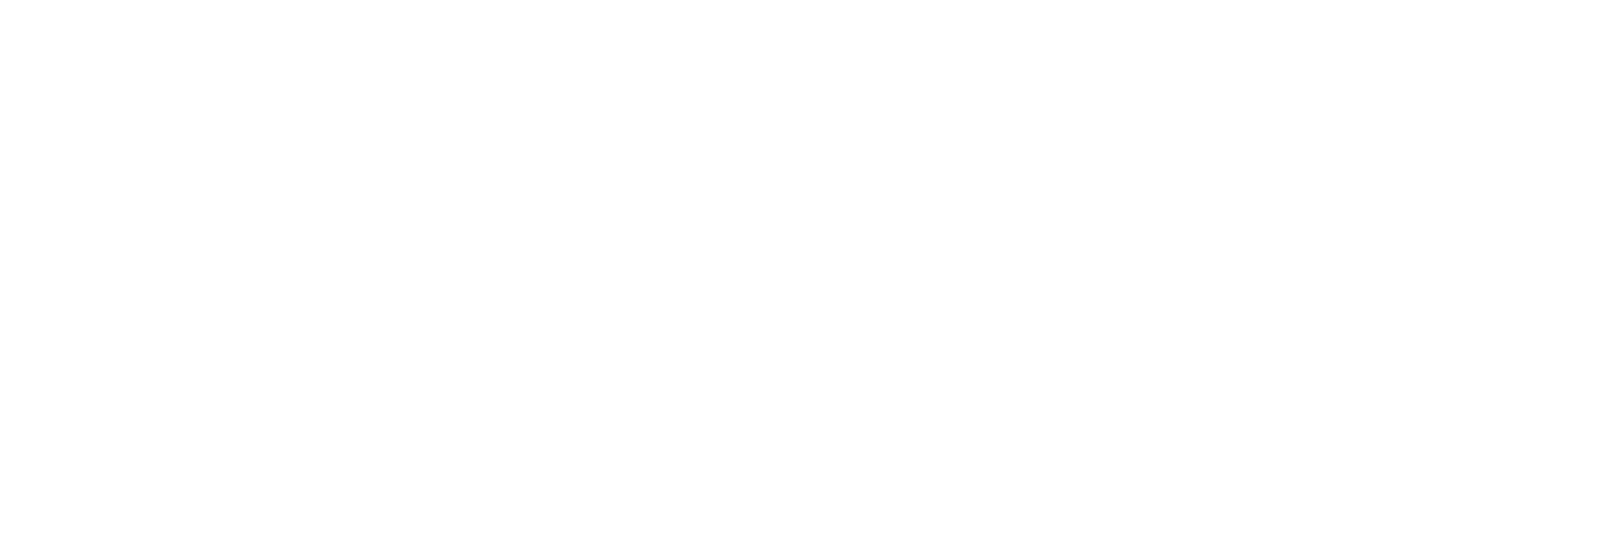 Dominion Energy logo large for dark backgrounds (transparent PNG)